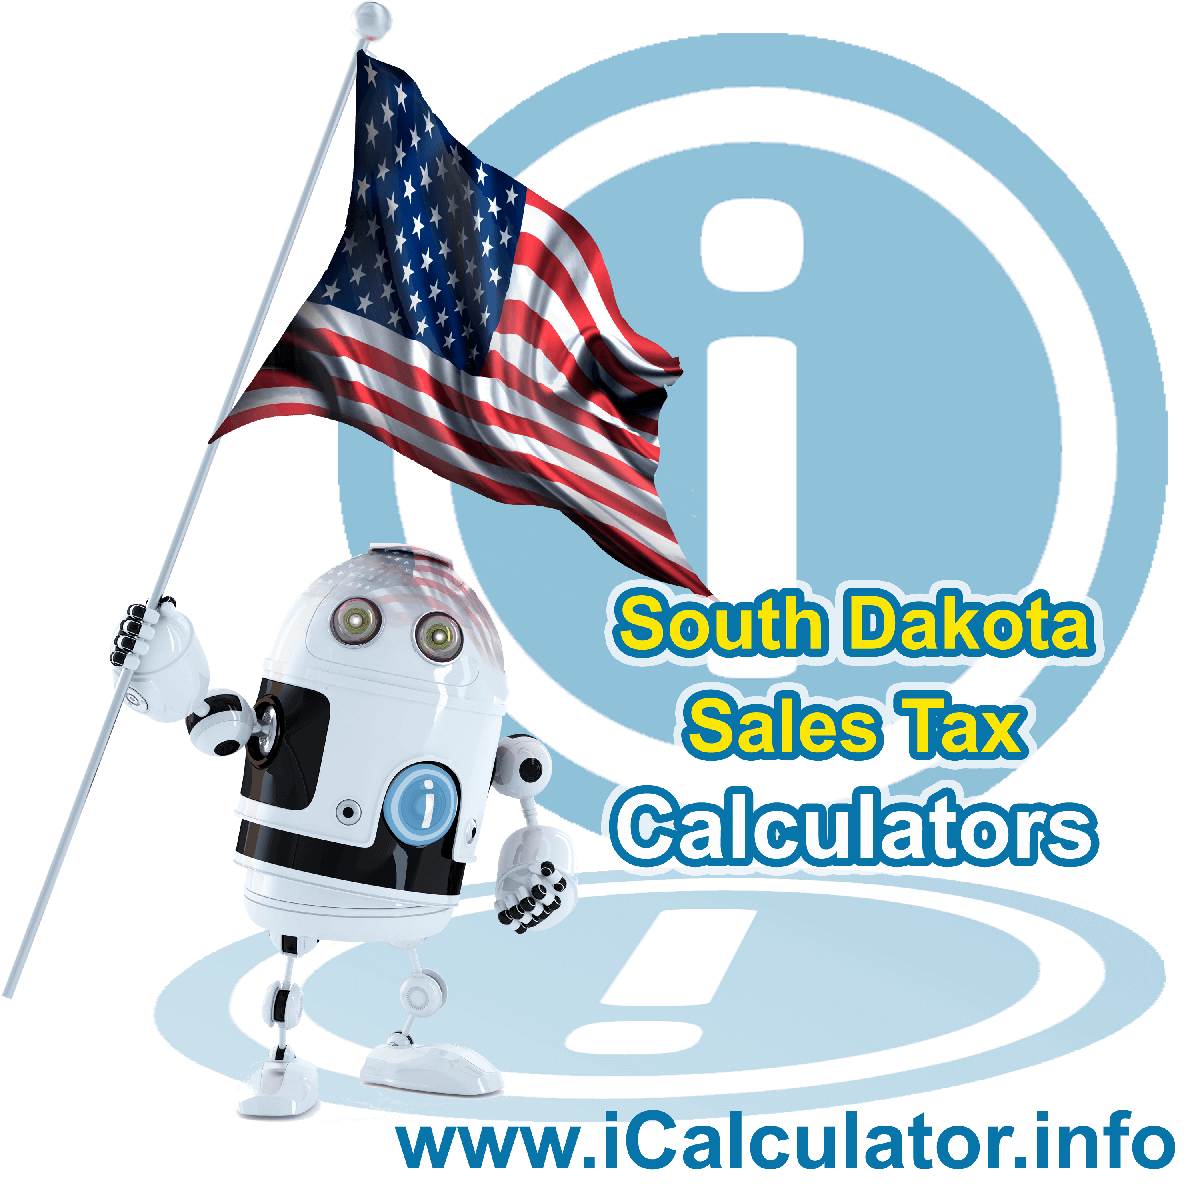 Humboldt Sales Rates: This image illustrates a calculator robot calculating Humboldt sales tax manually using the Humboldt Sales Tax Formula. You can use this information to calculate Humboldt Sales Tax manually or use the Humboldt Sales Tax Calculator to calculate sales tax online.